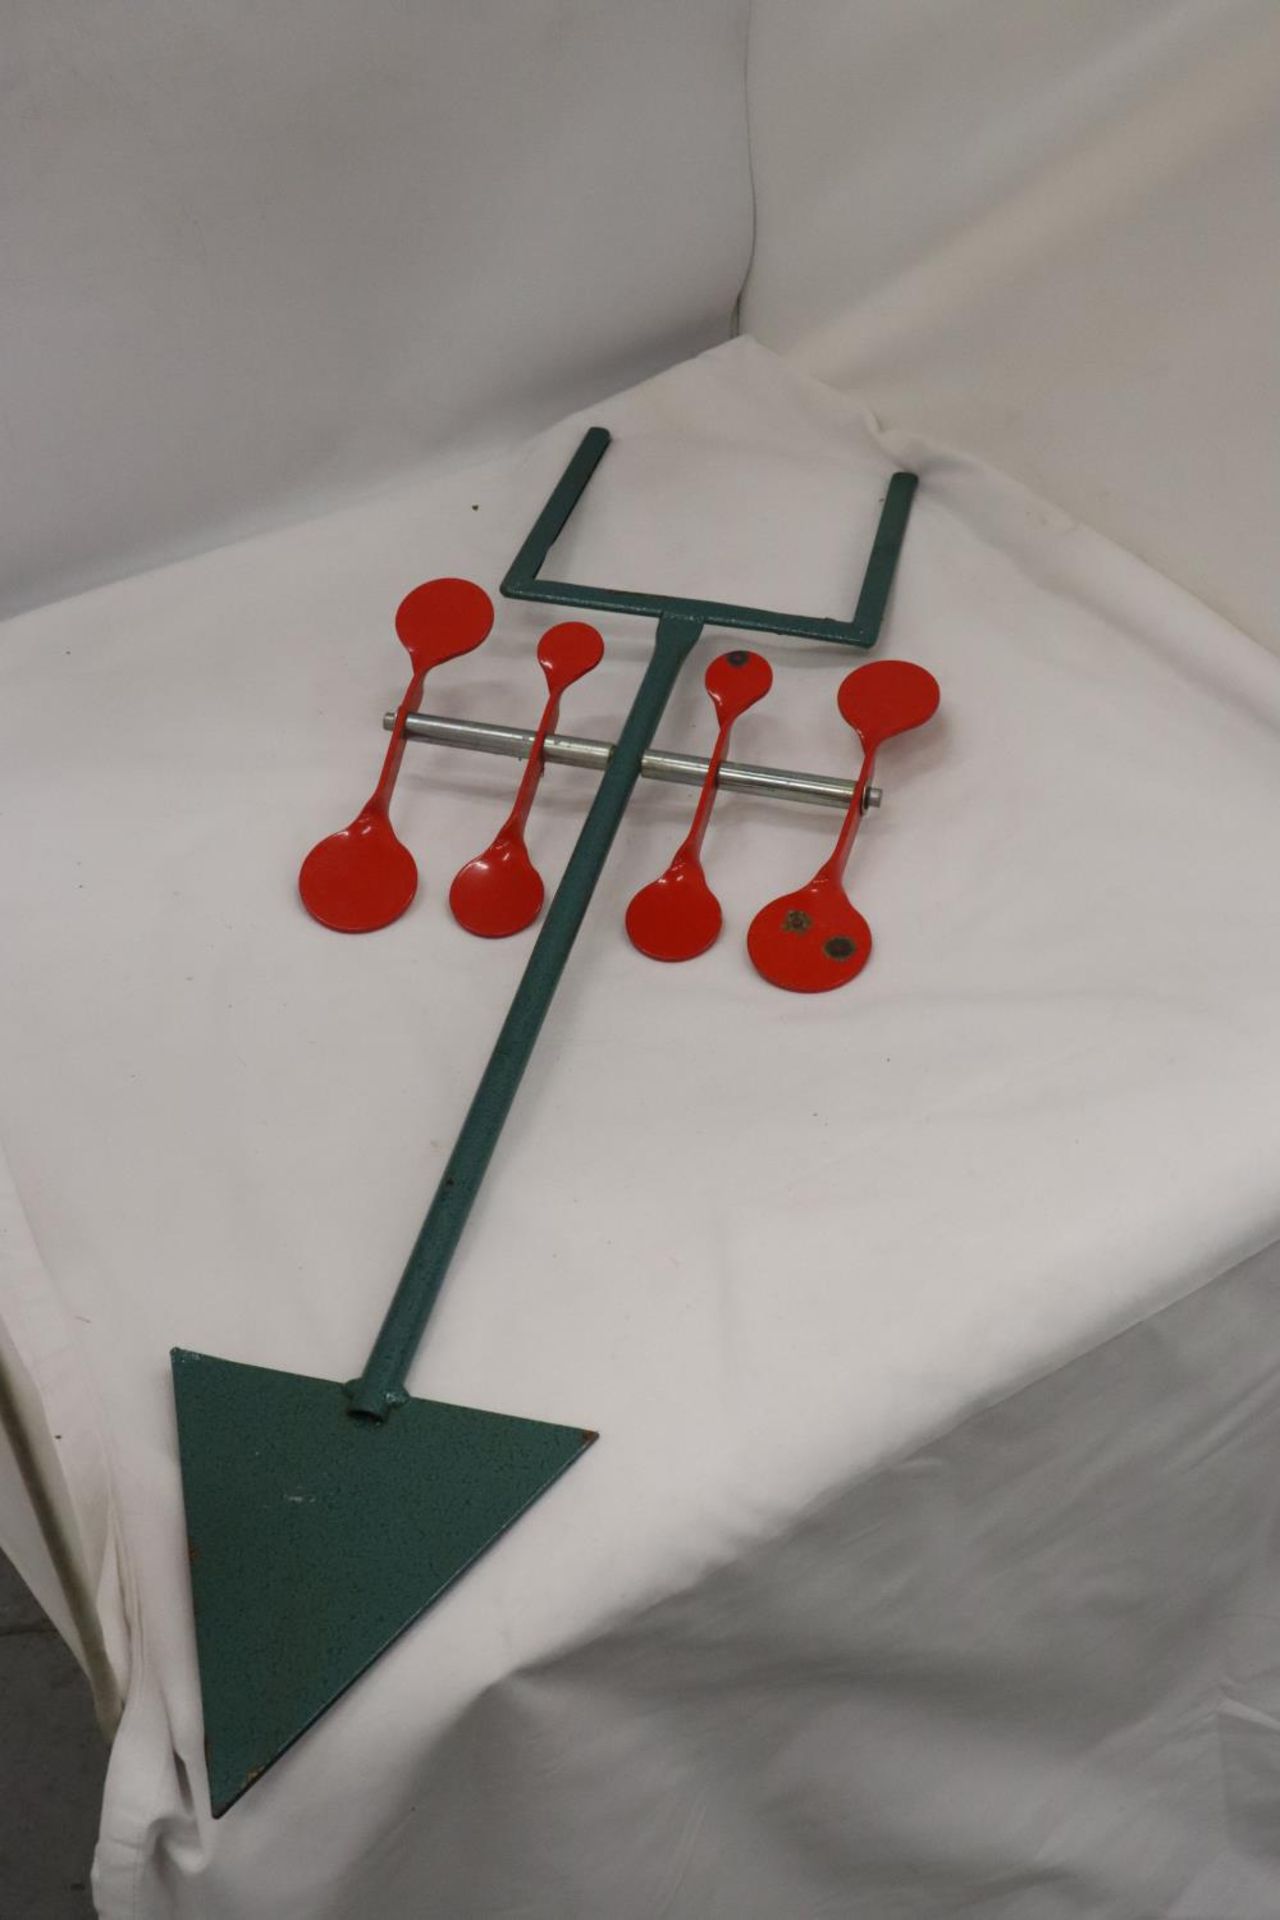 A METAL SPINNING TARGET FOR RIFLE PRACTICE